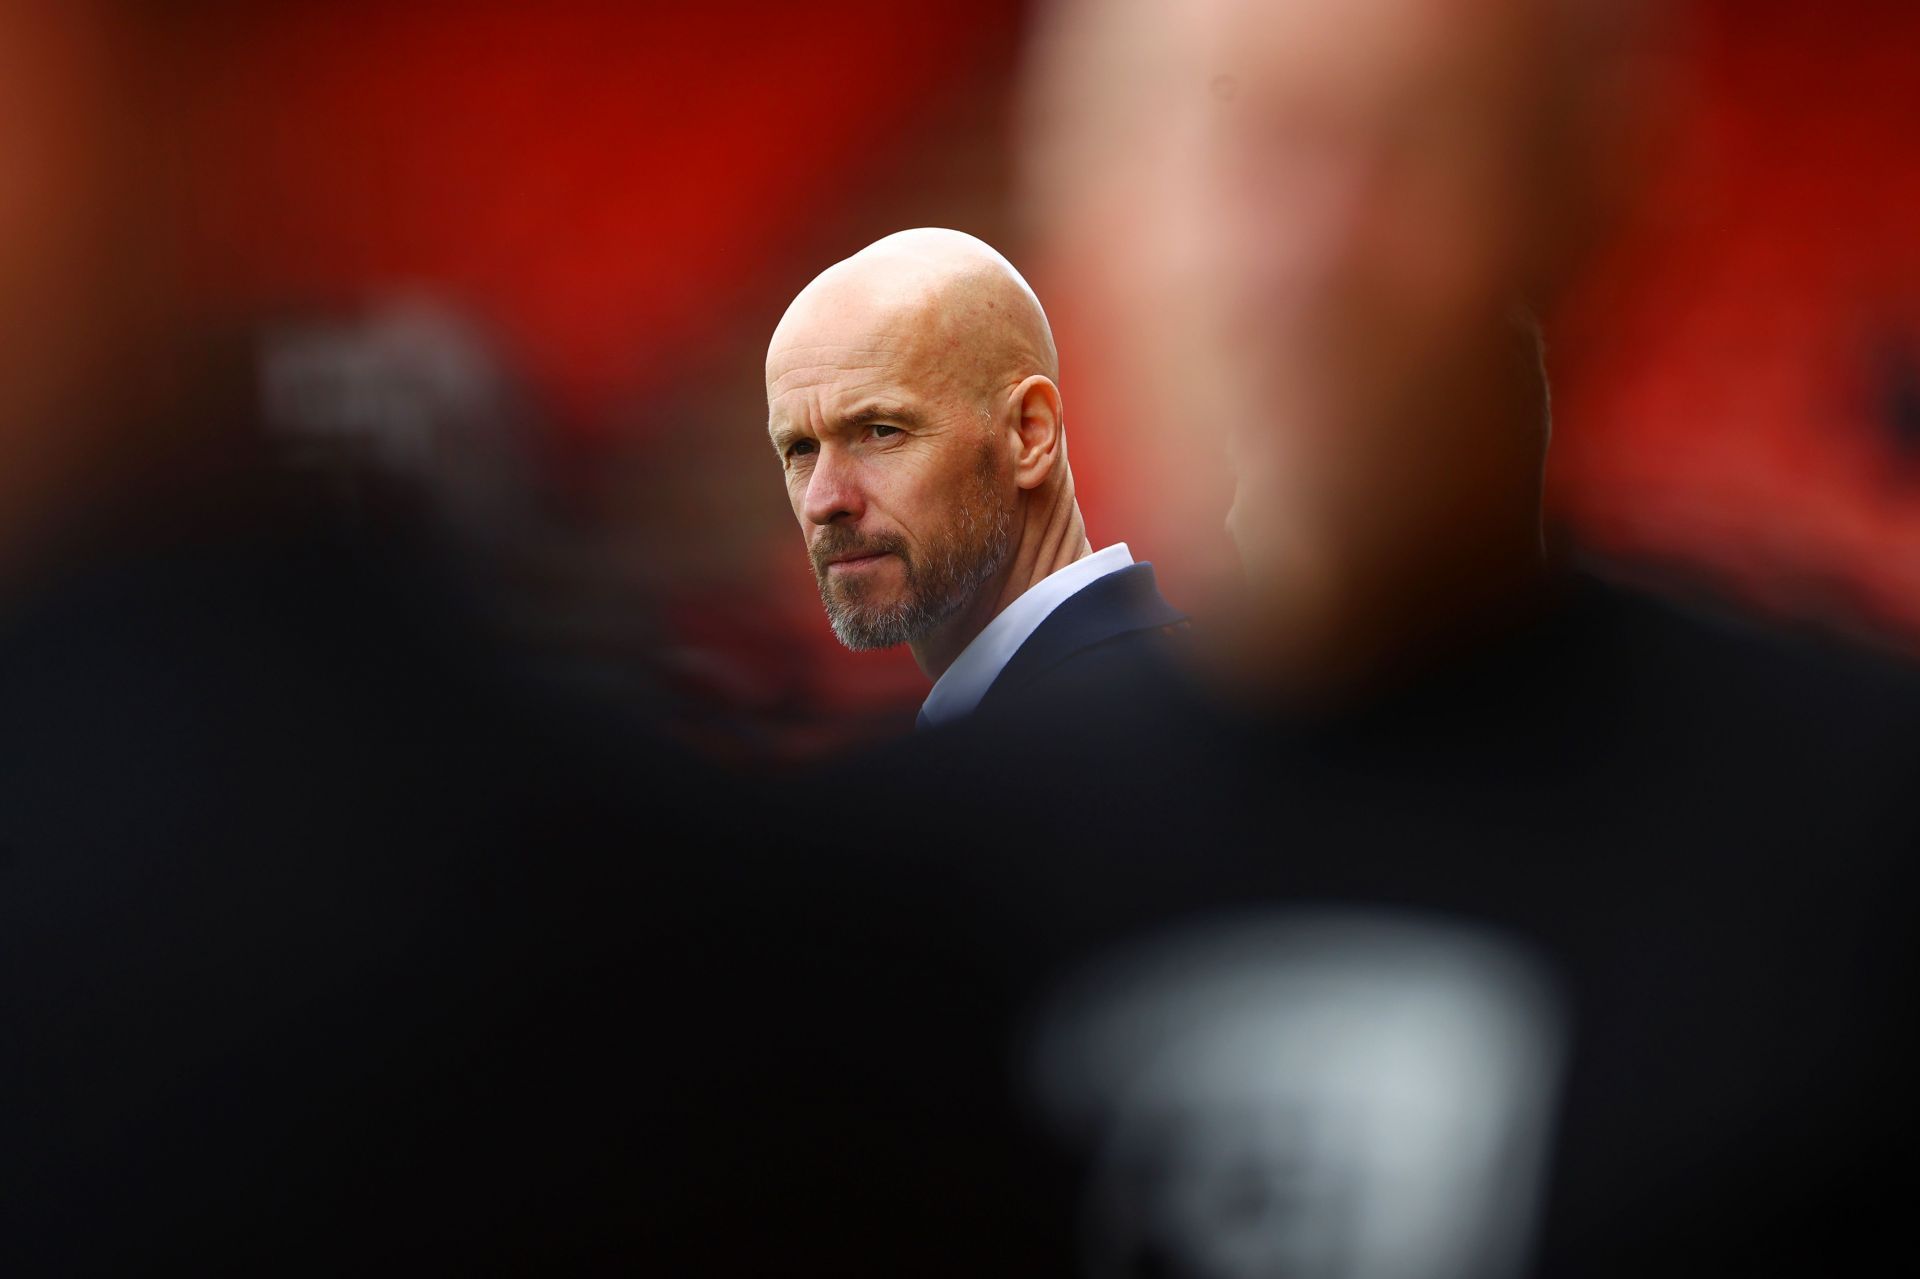 Ten Hag believes the club must continue to spend to compete.